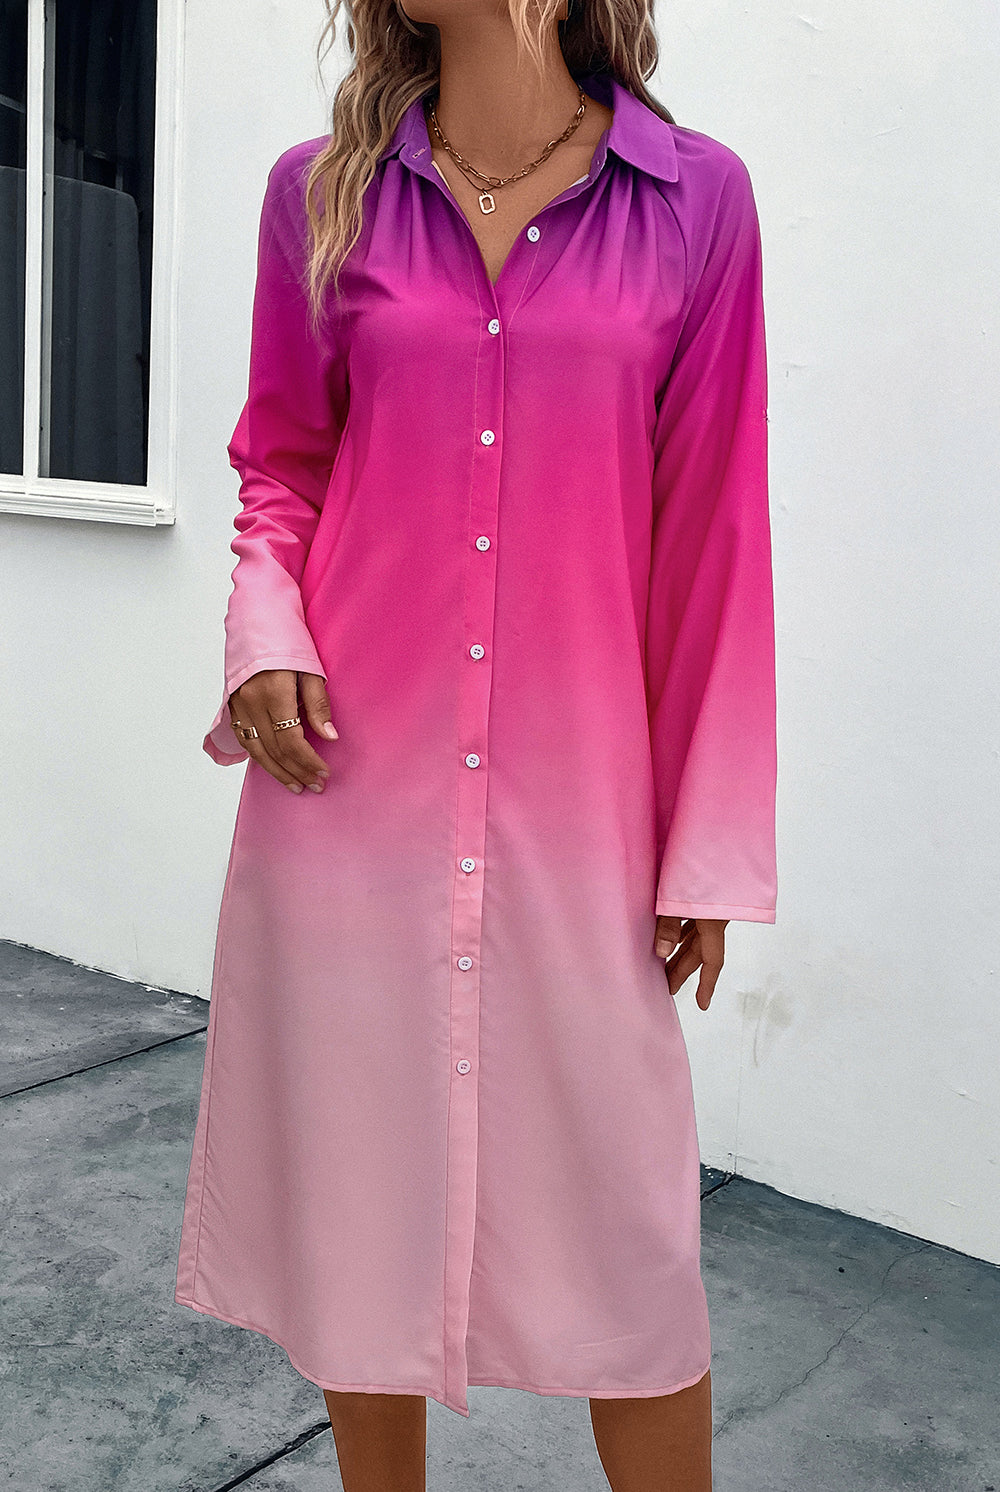 Rosy Brown Playing The Game Purple To Pink Gradient Long Sleeve Shirt Dress Midi Dresses